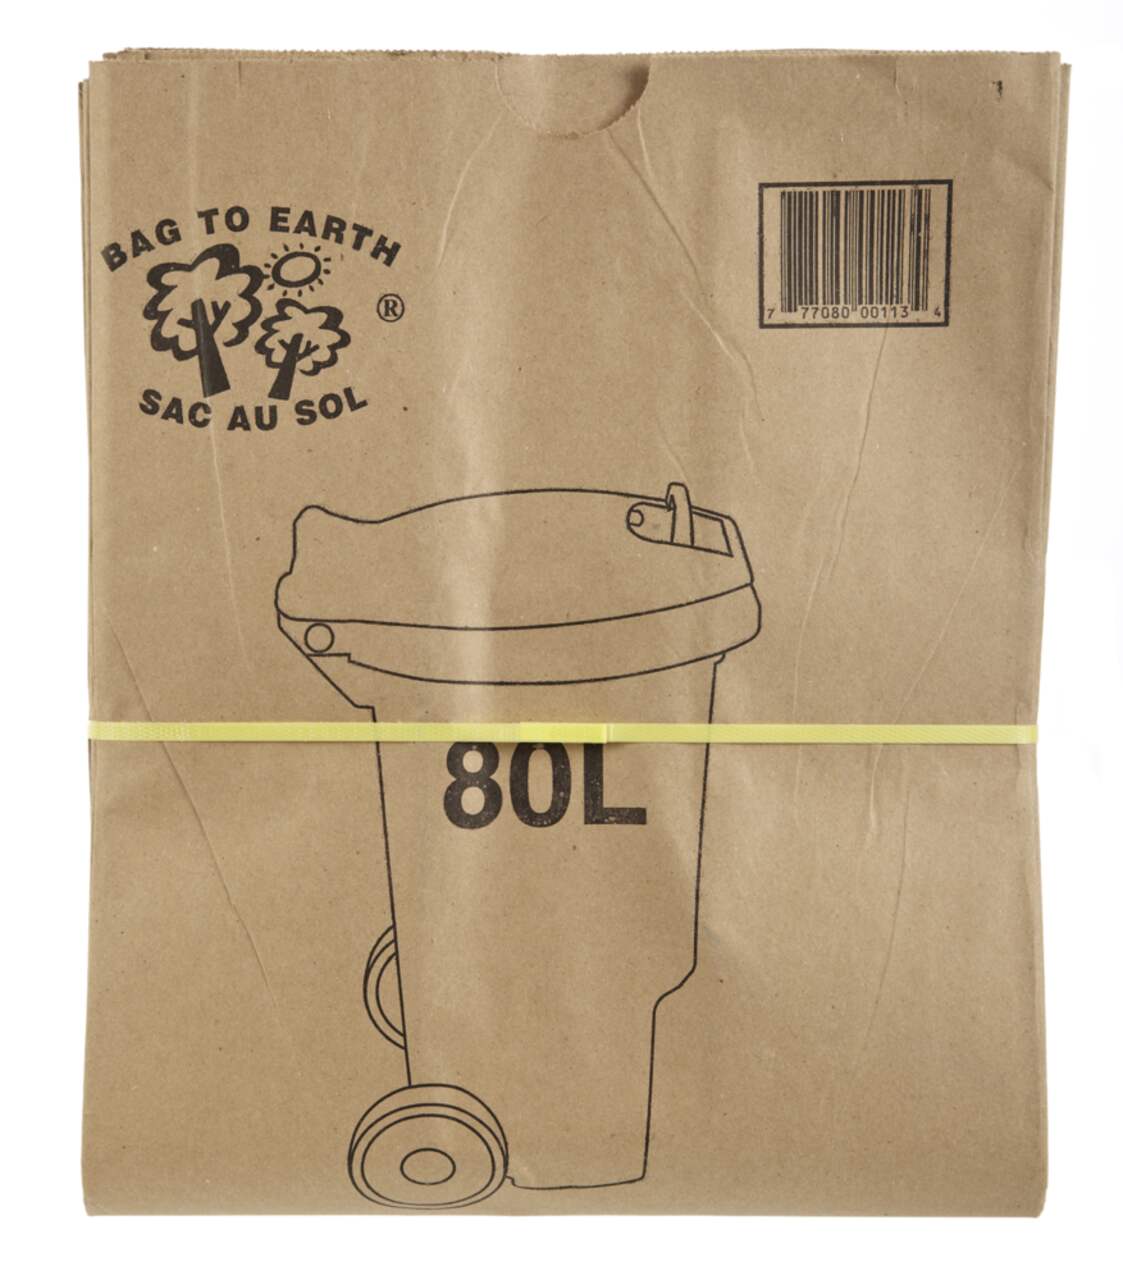 https://media-www.canadiantire.ca/product/living/cleaning/refuse-bags/0429768/bag-to-earth-paper-bin-liner-bags-80l-3cda6ee0-9728-463e-8a63-145853e7996e.png?imdensity=1&imwidth=640&impolicy=mZoom